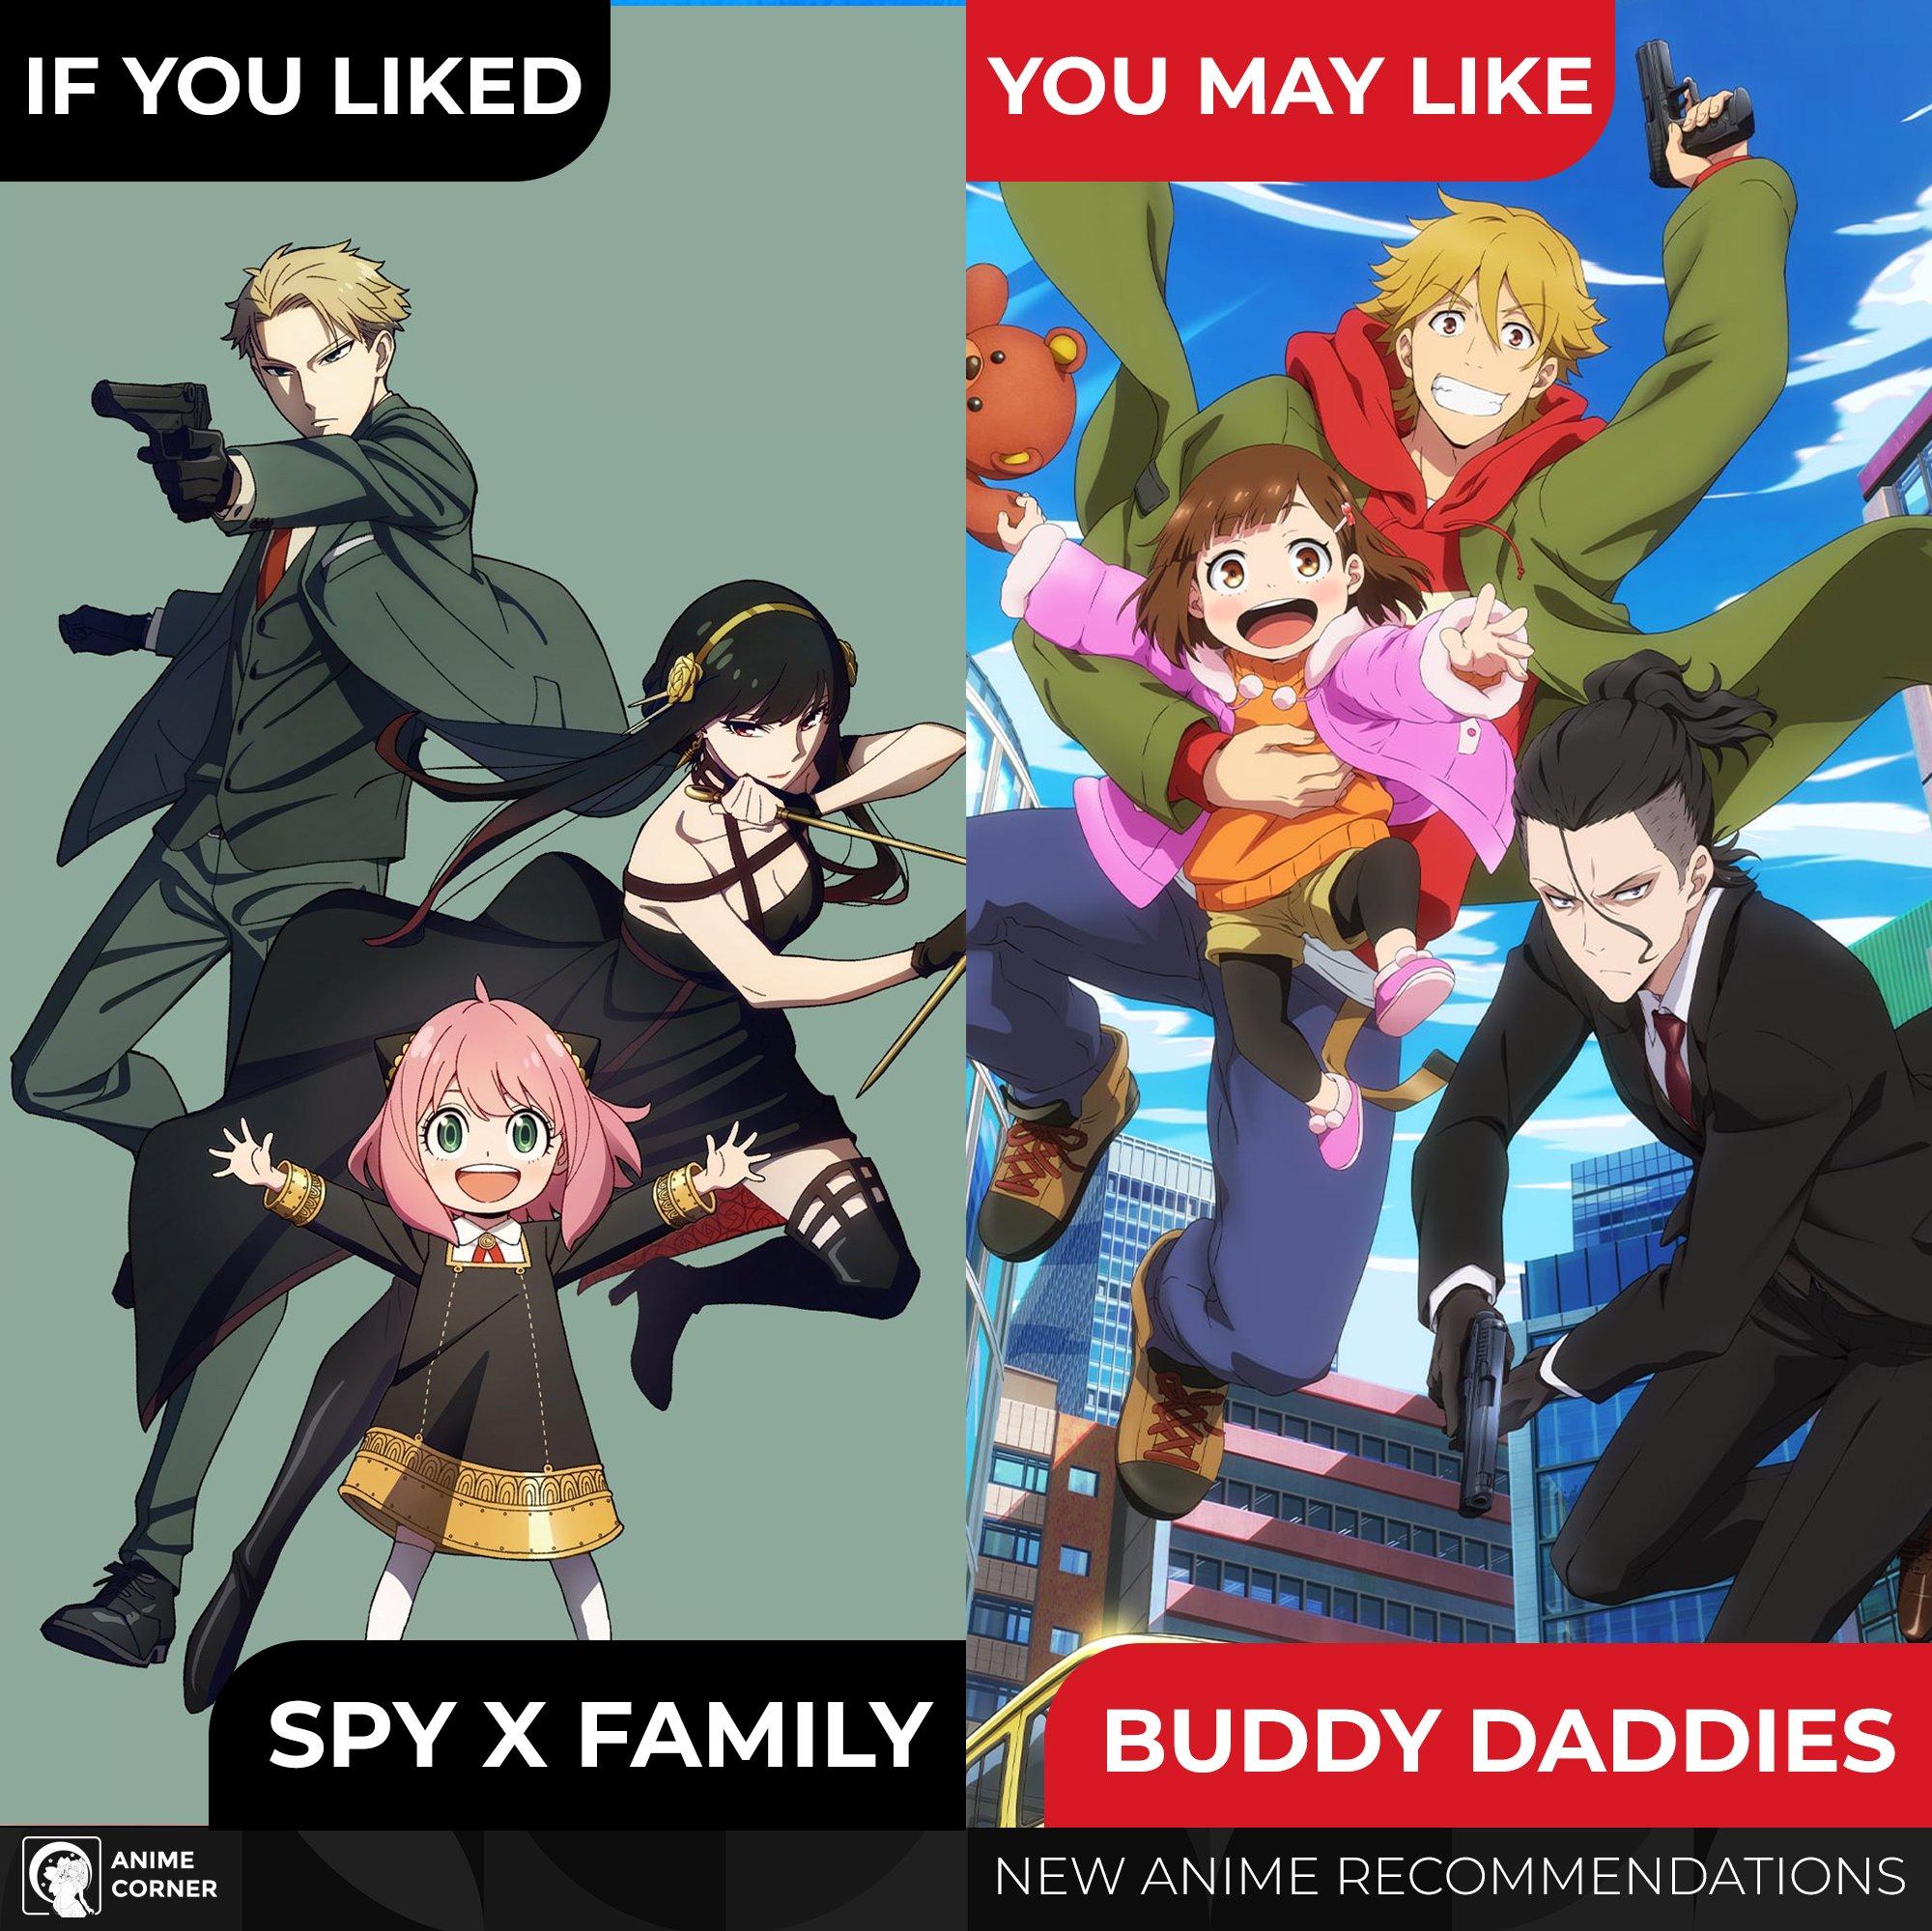 Anime Corner On Spy X Family Fans Have Something New To